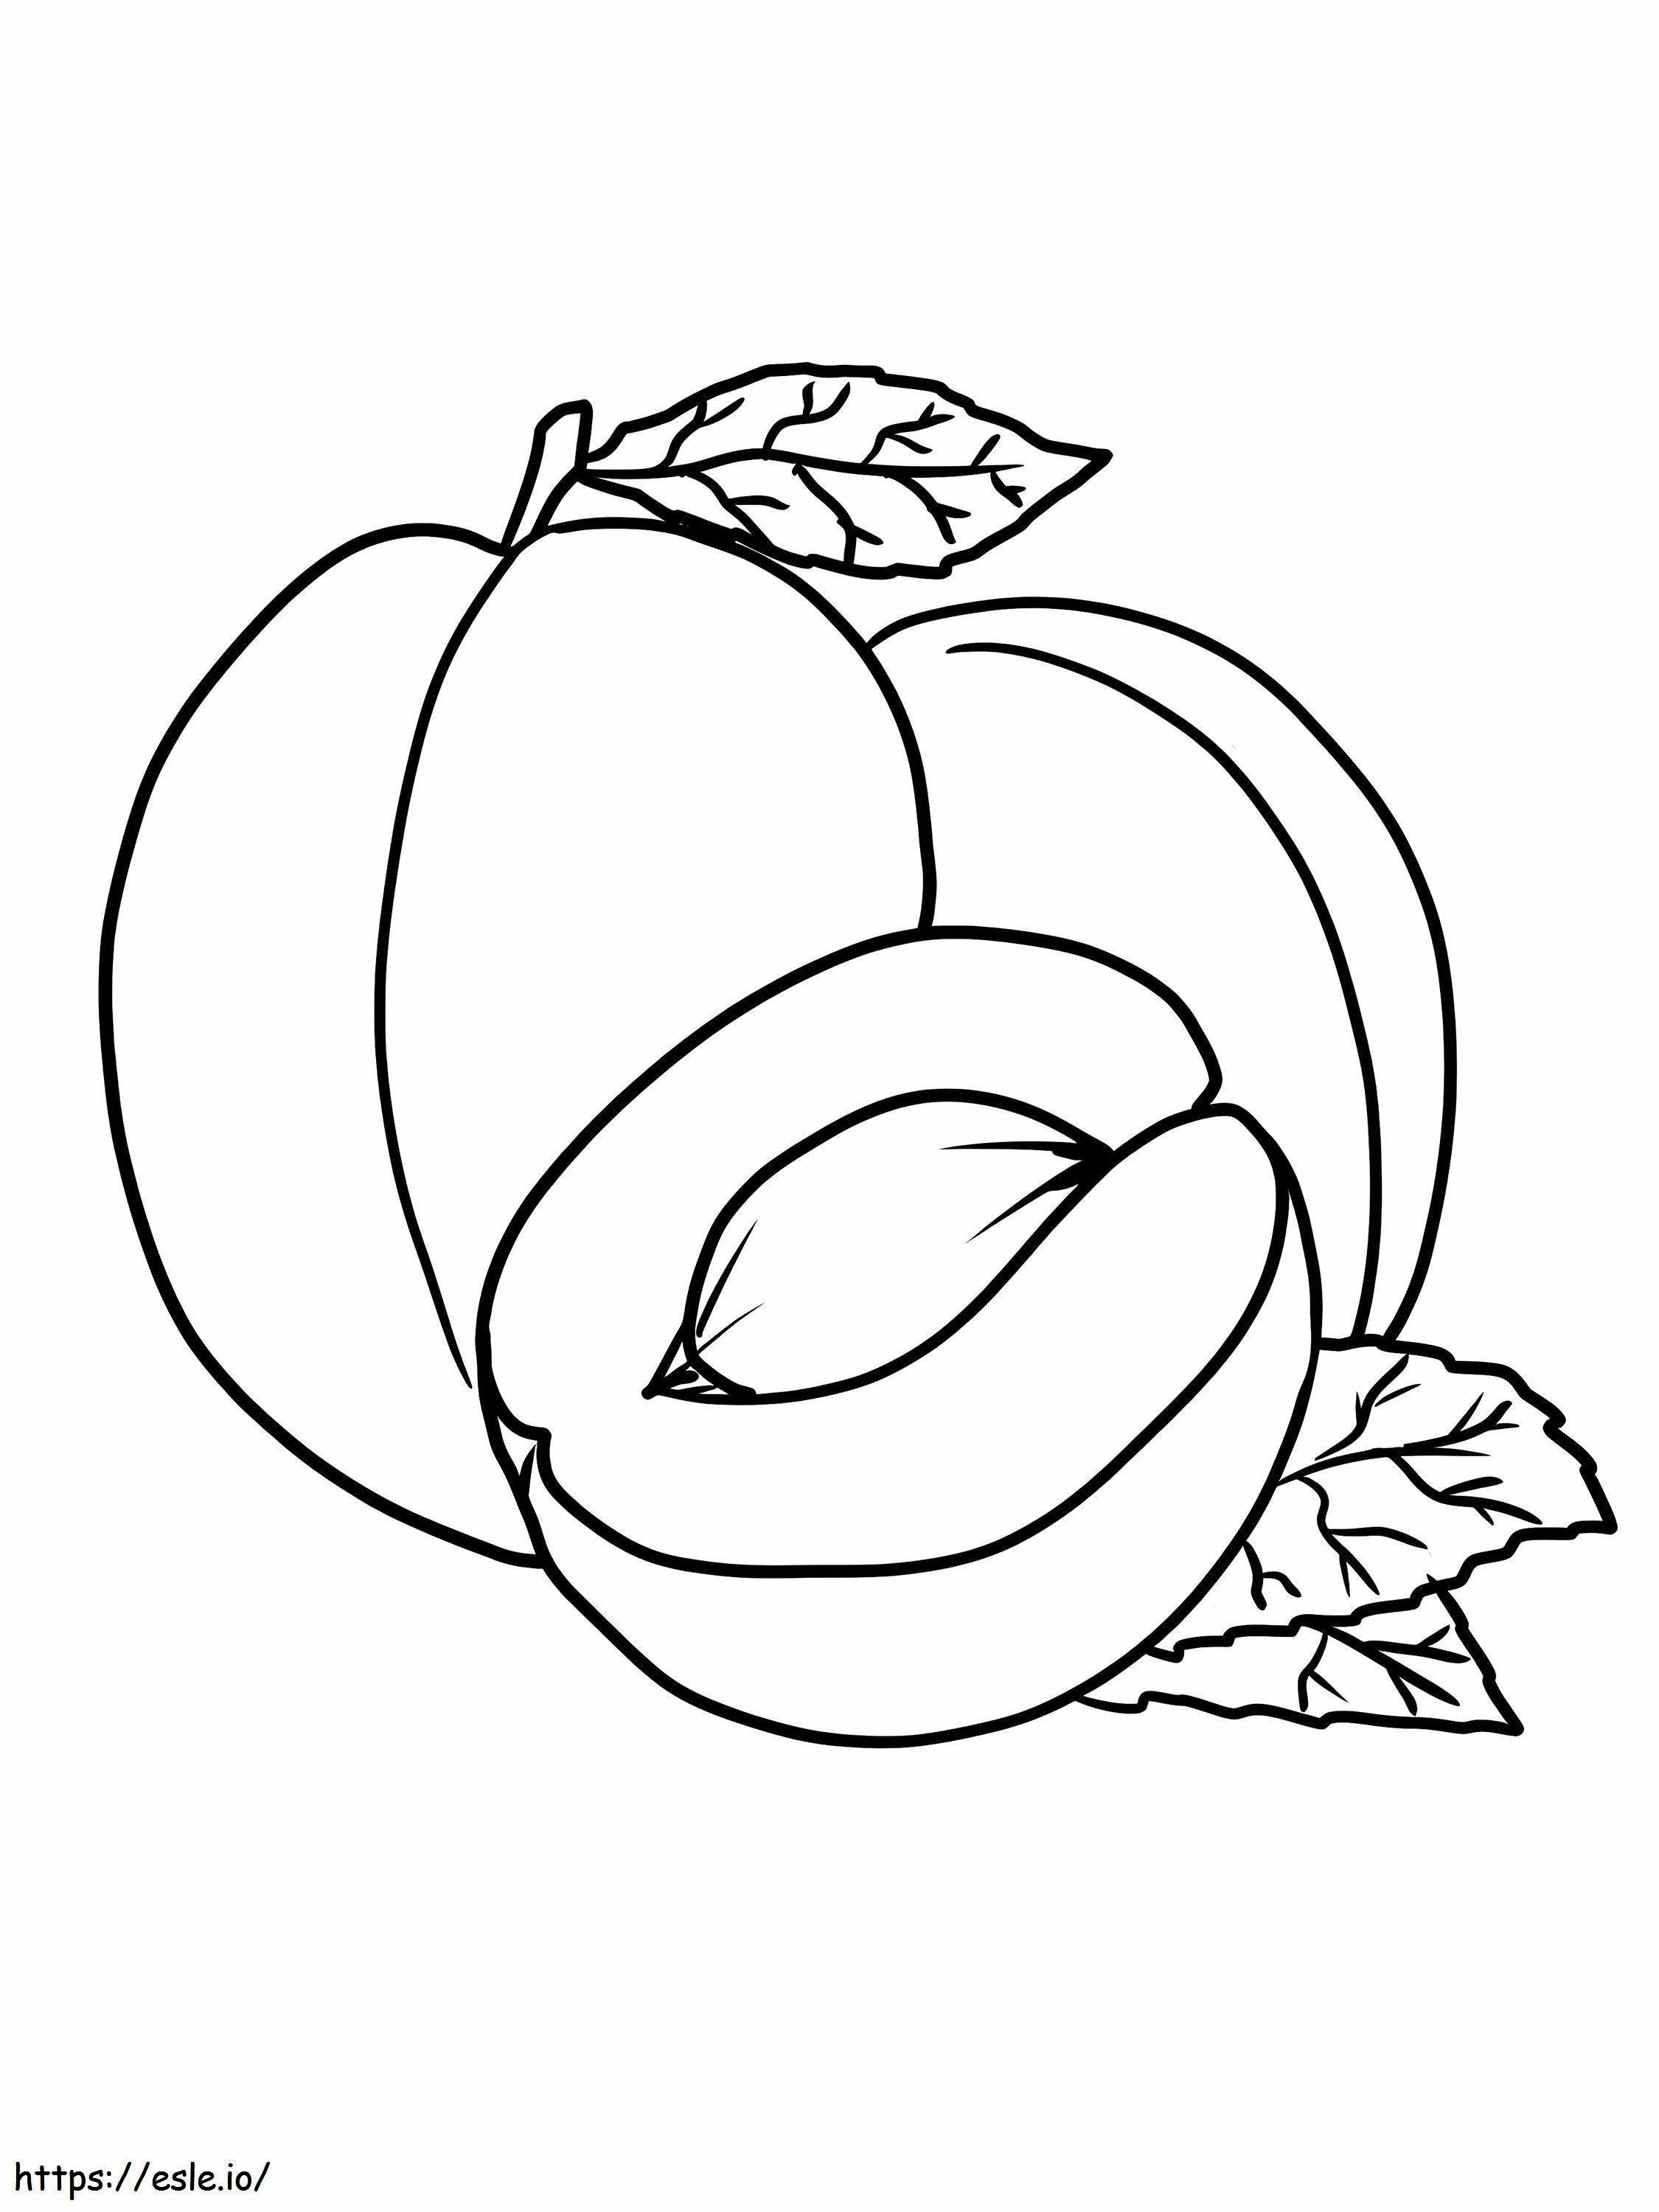 Apricot 2 coloring page